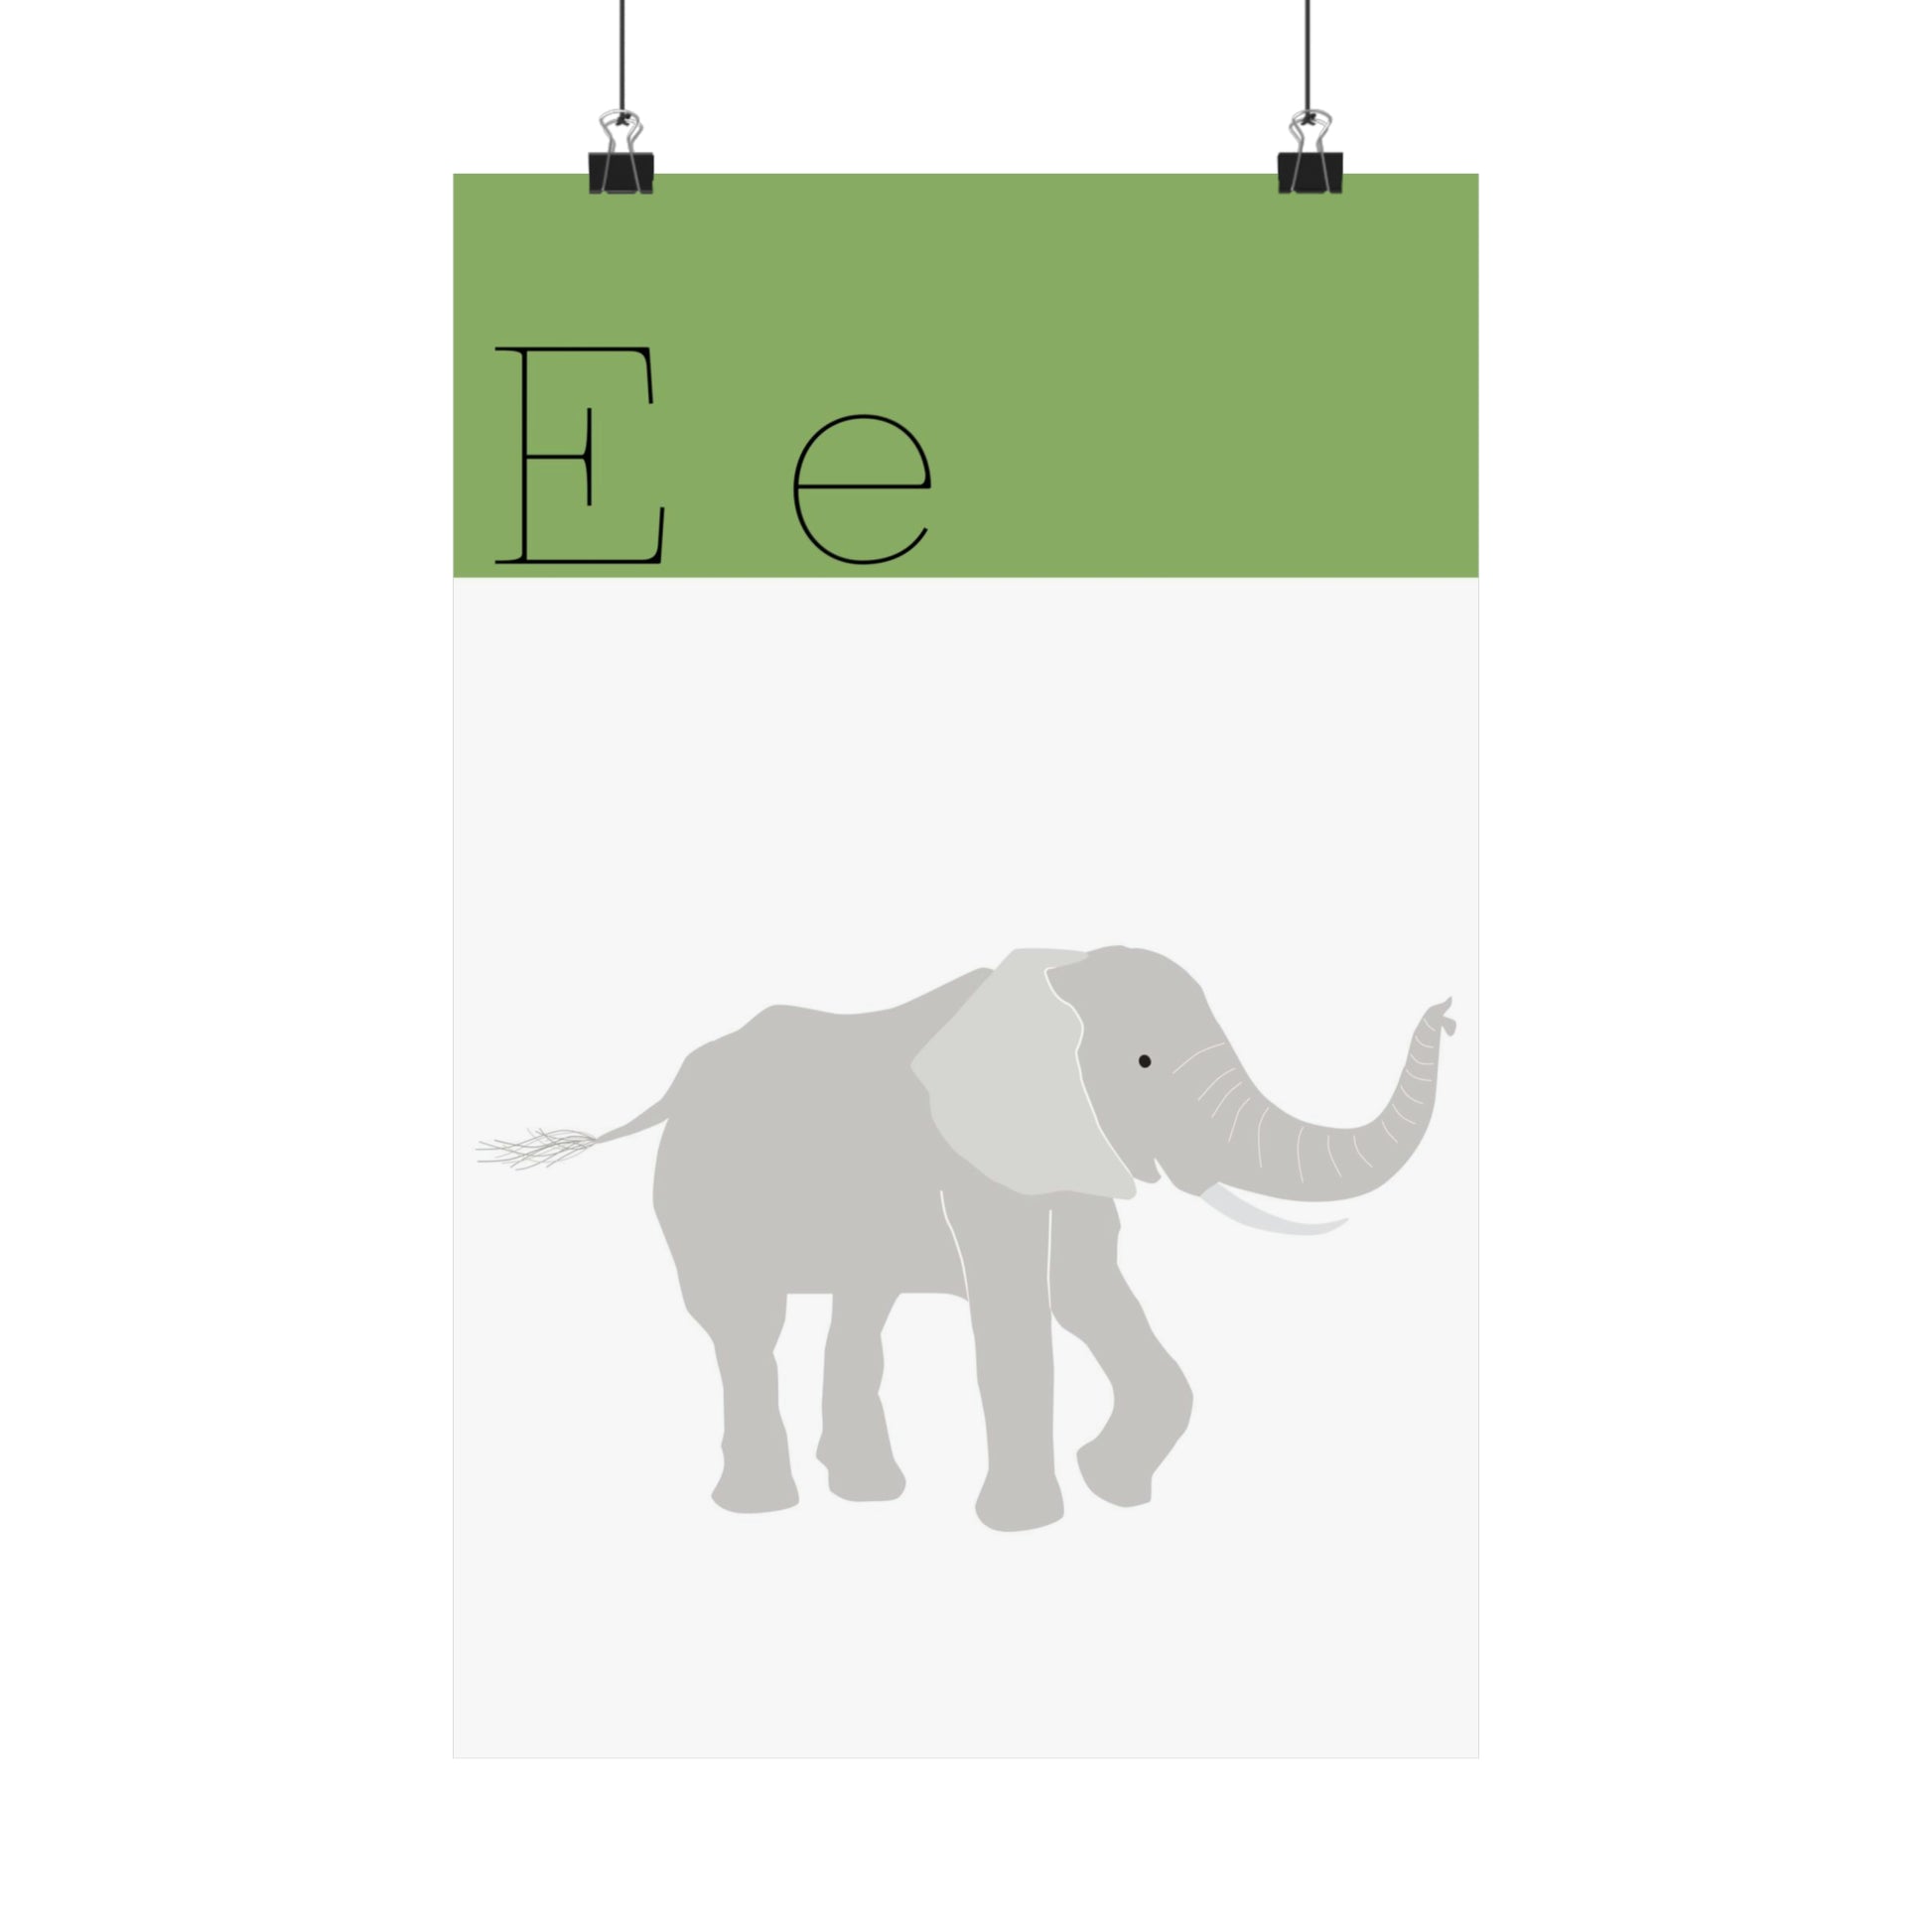 Elephant Poster in white background with clips holding the poster up